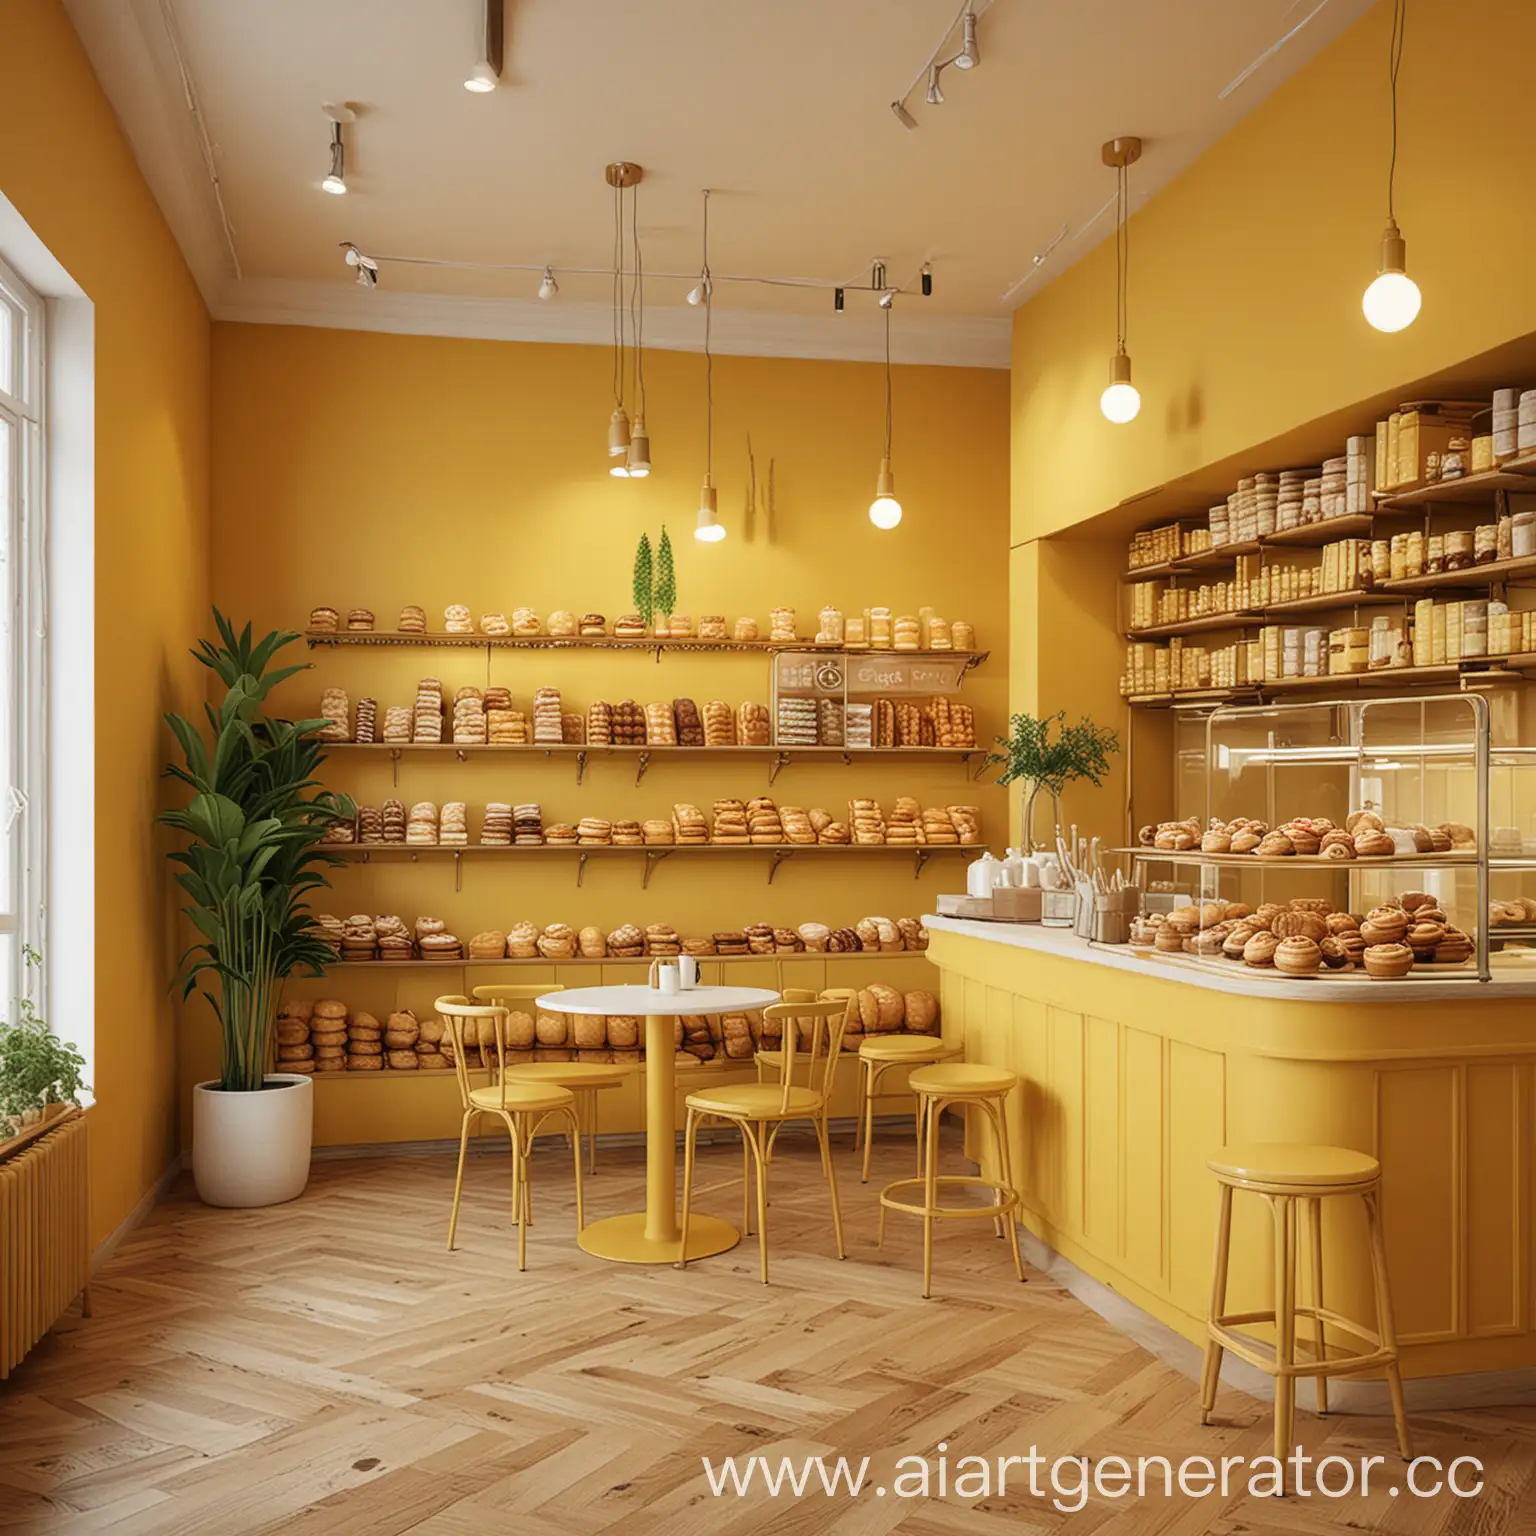 Cozy-CafeConfectionery-Warm-Yellow-Ambiance-with-Pastries-and-Seating